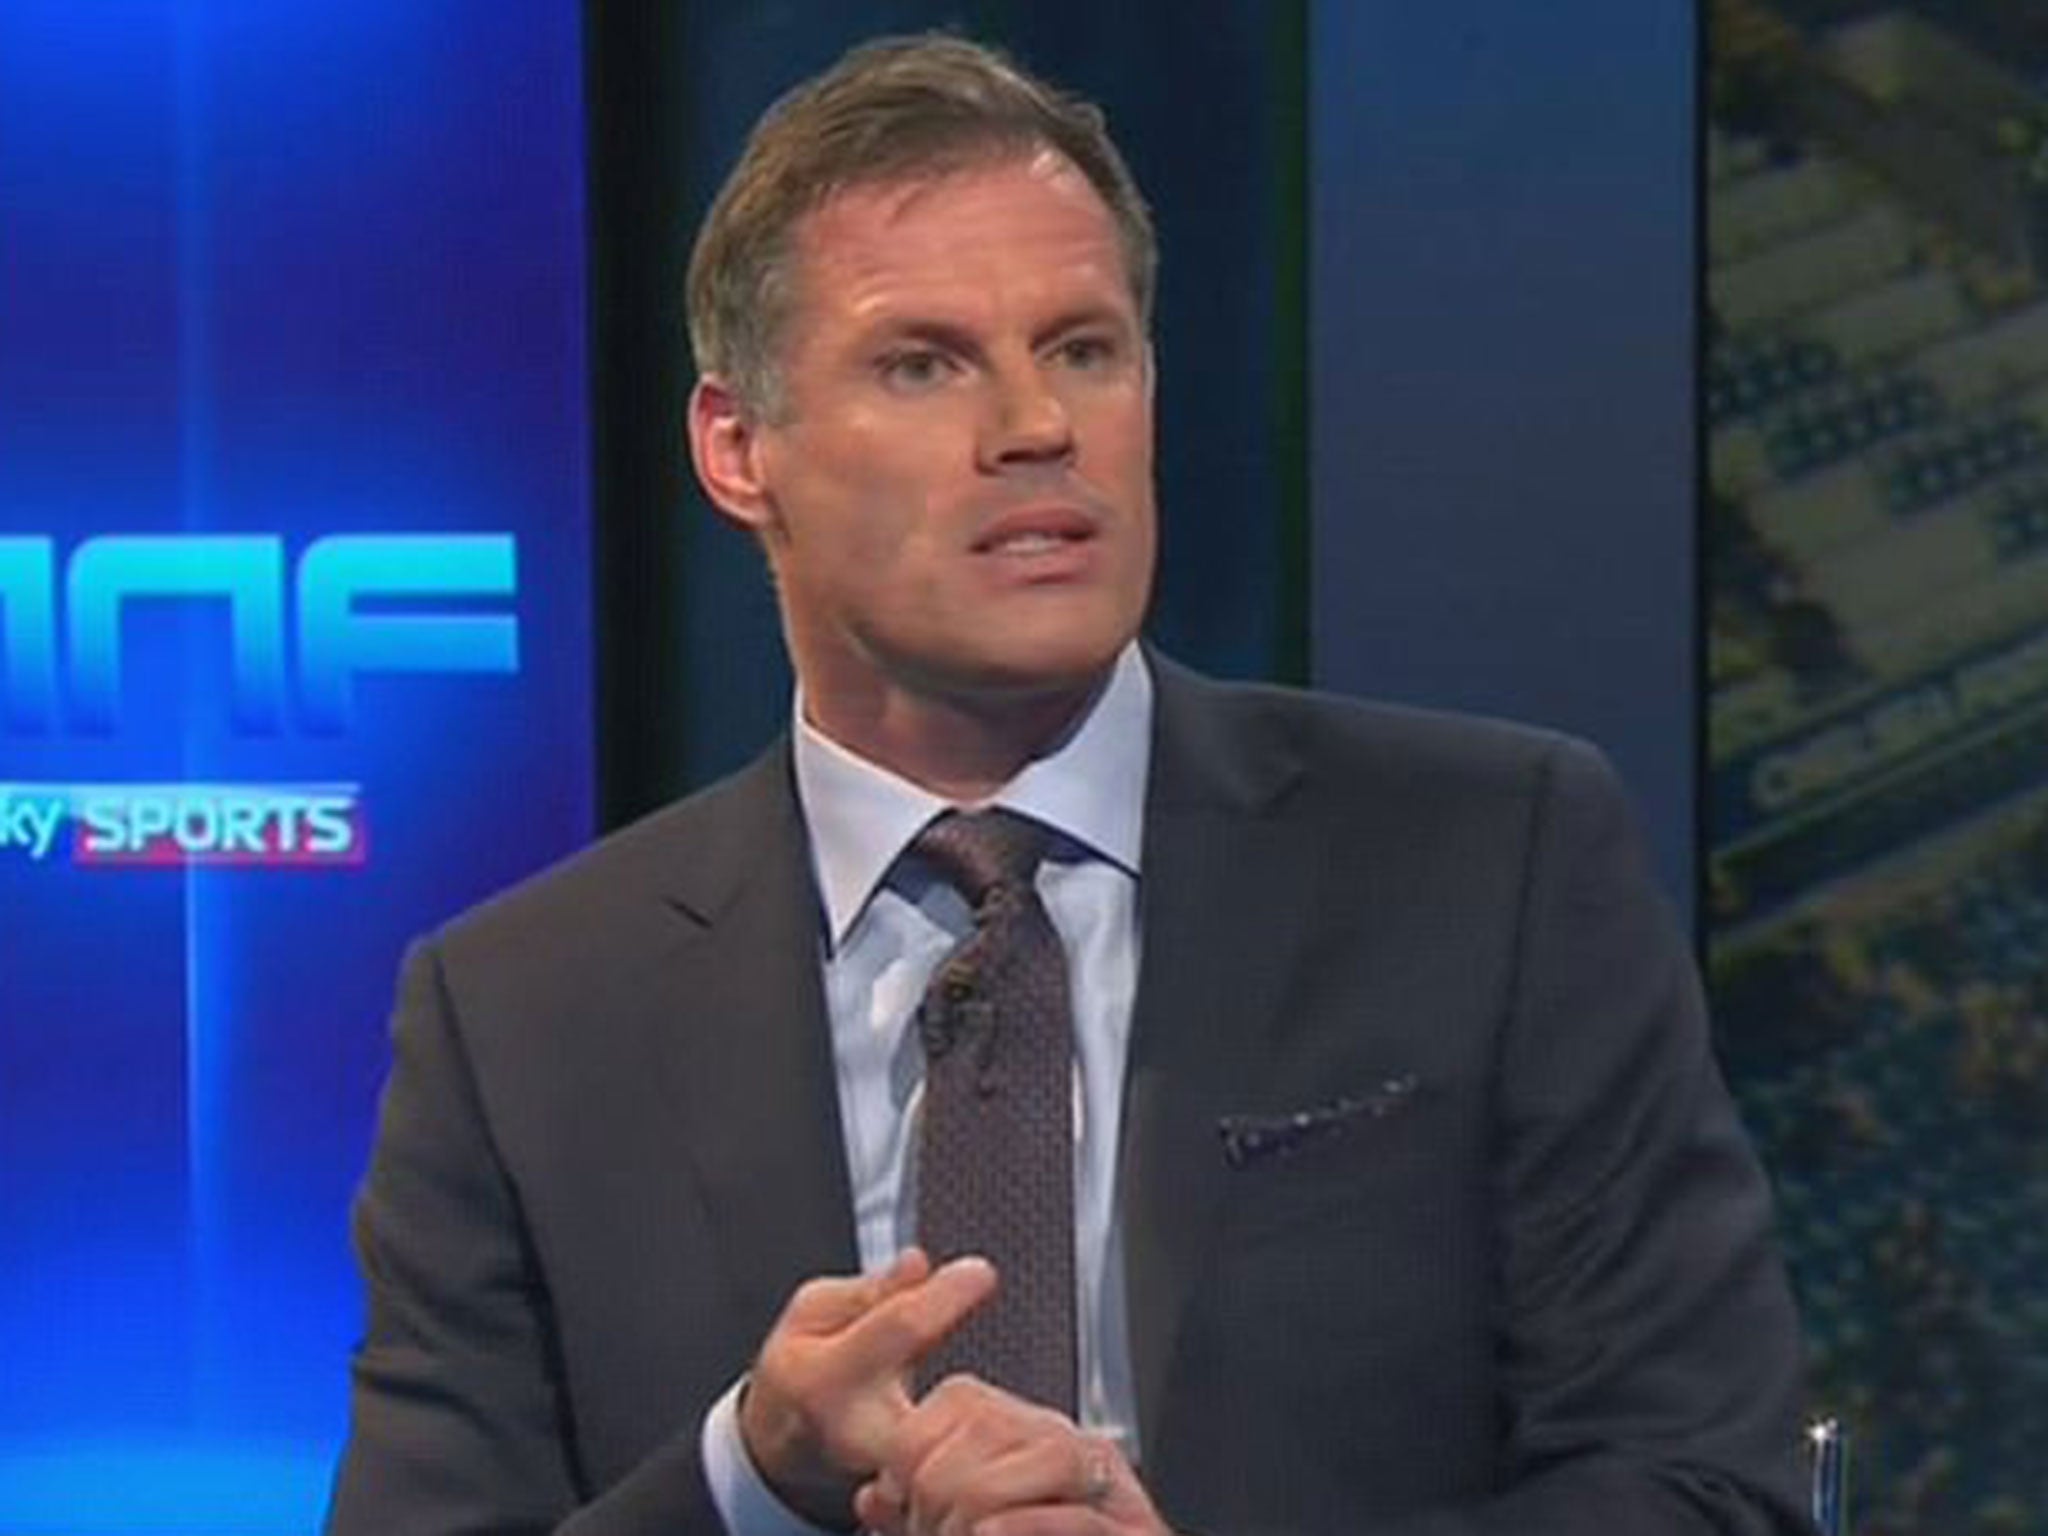 Jamie Carragher has worked with Sky Sports since he retired in 2013